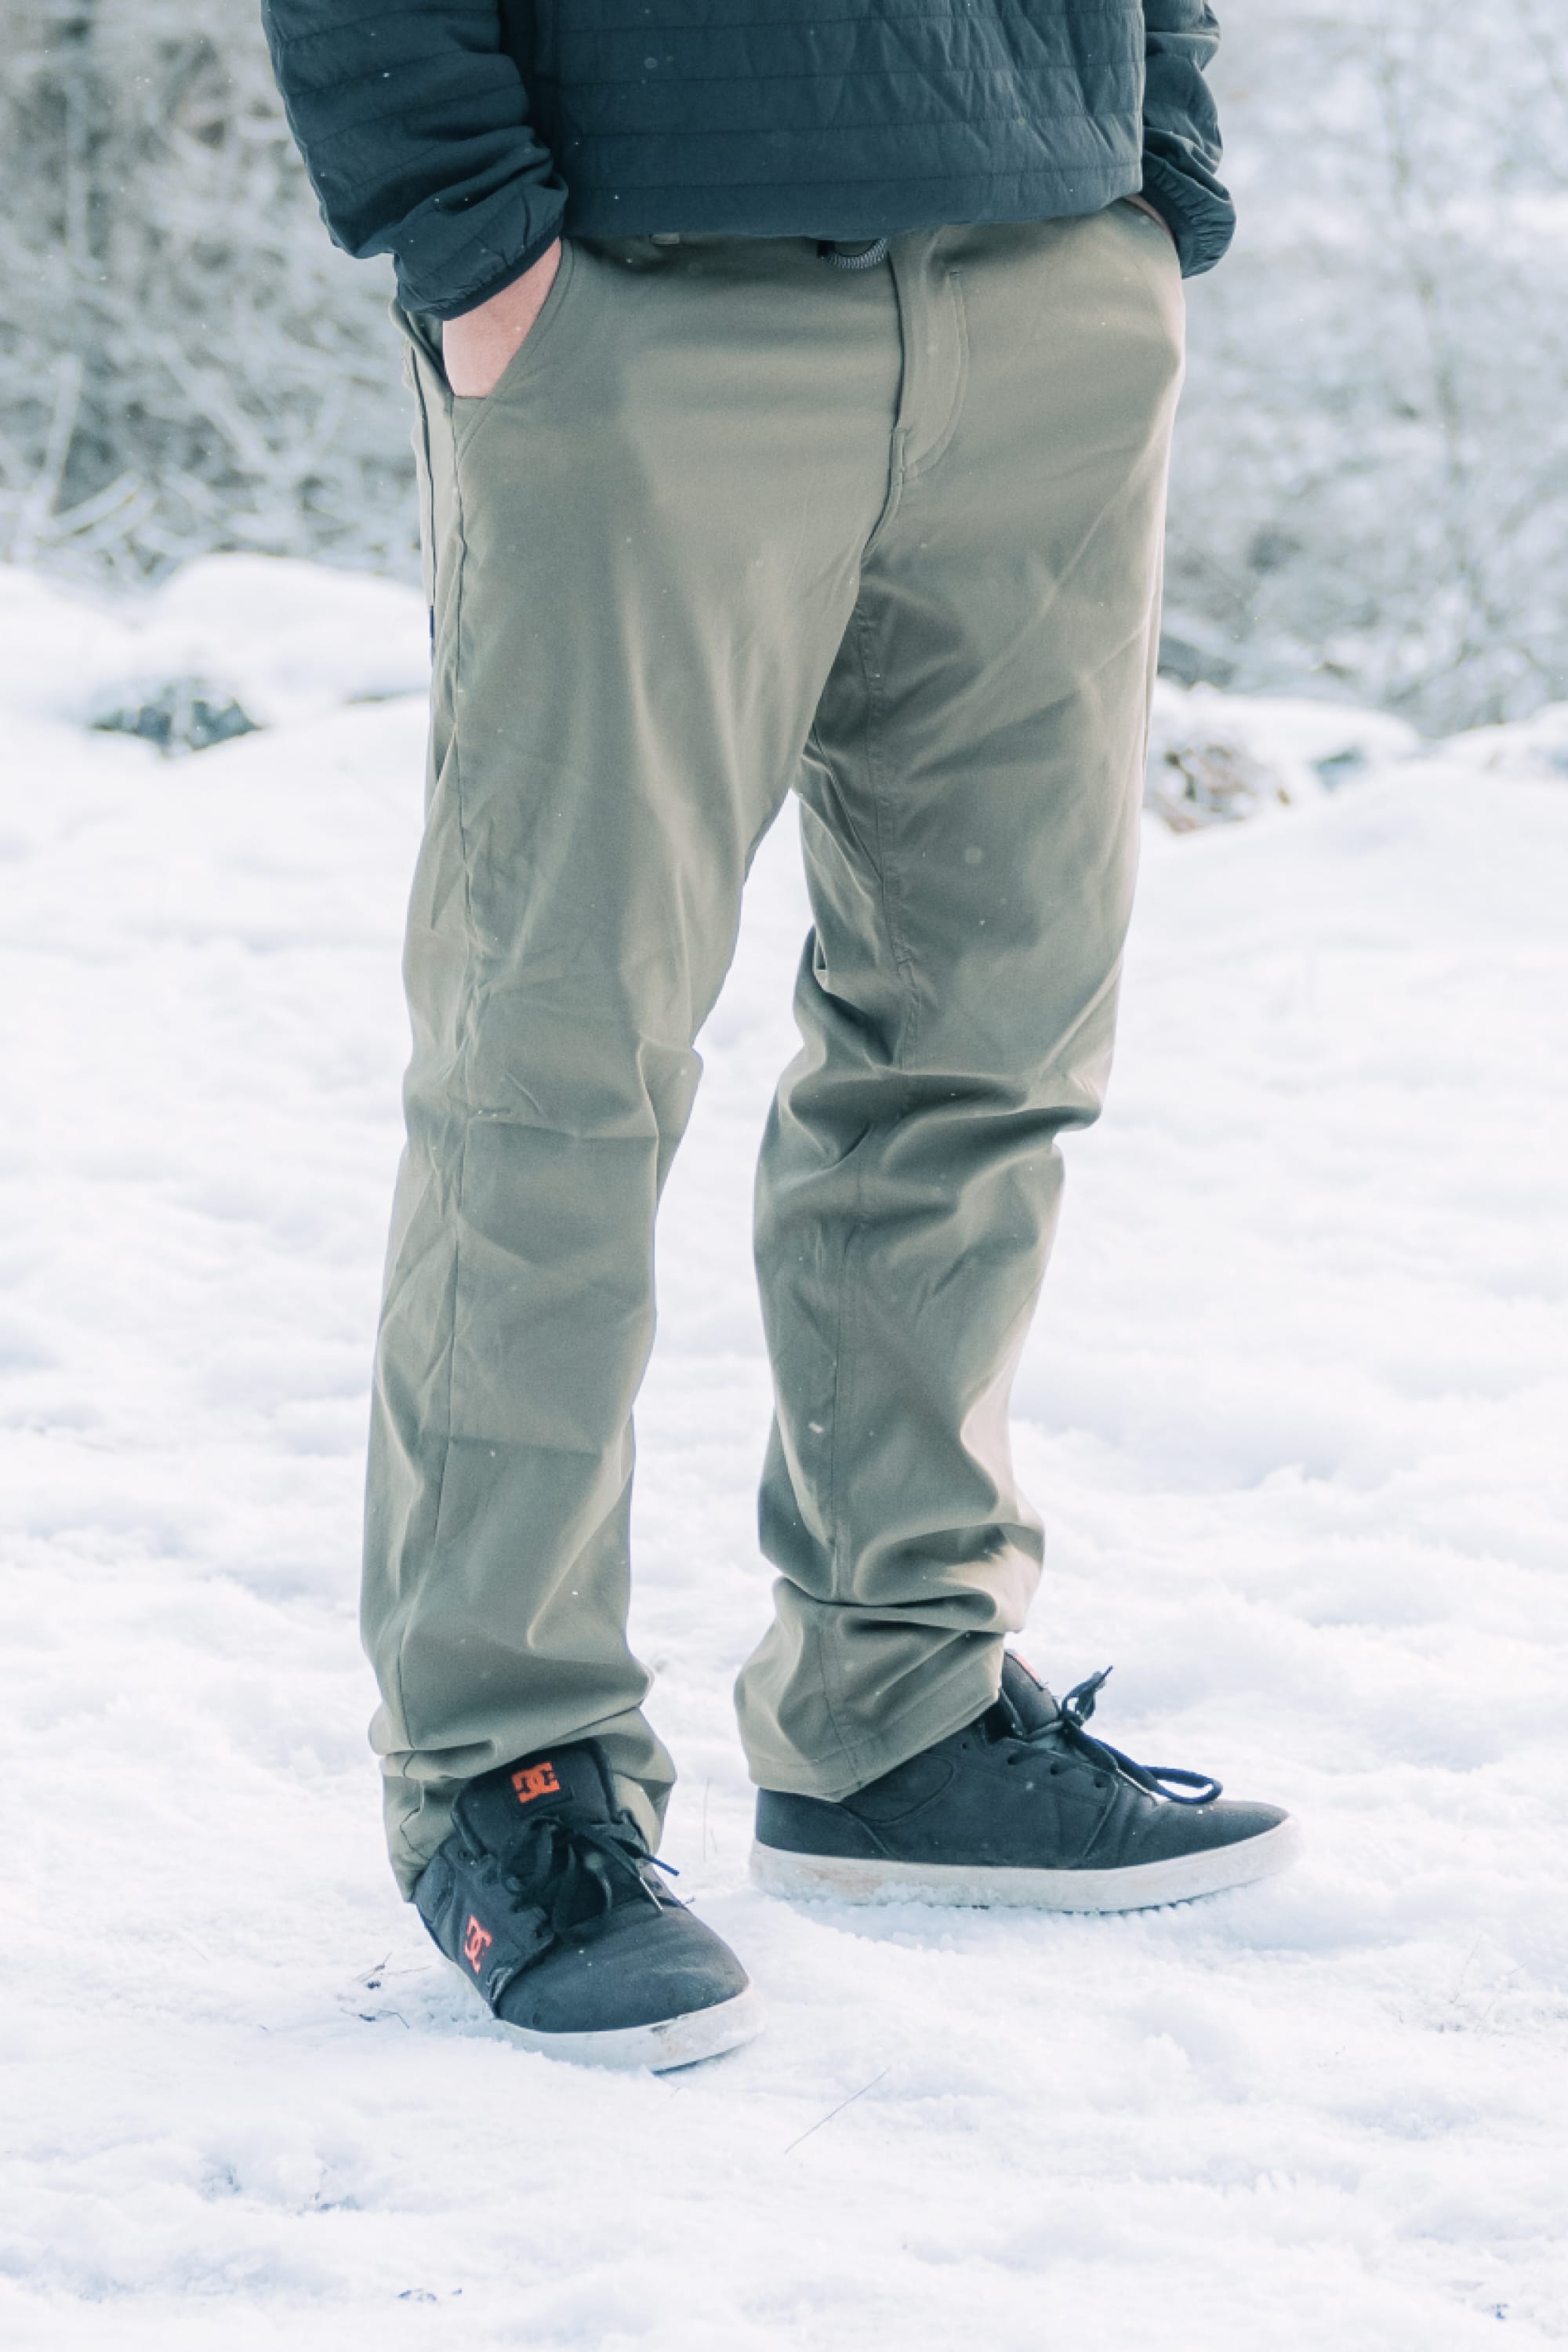 Merino Thermals : Mountain Warehouse Canada Footwear, Have a look at our  selection of mountain warehouse trousers.